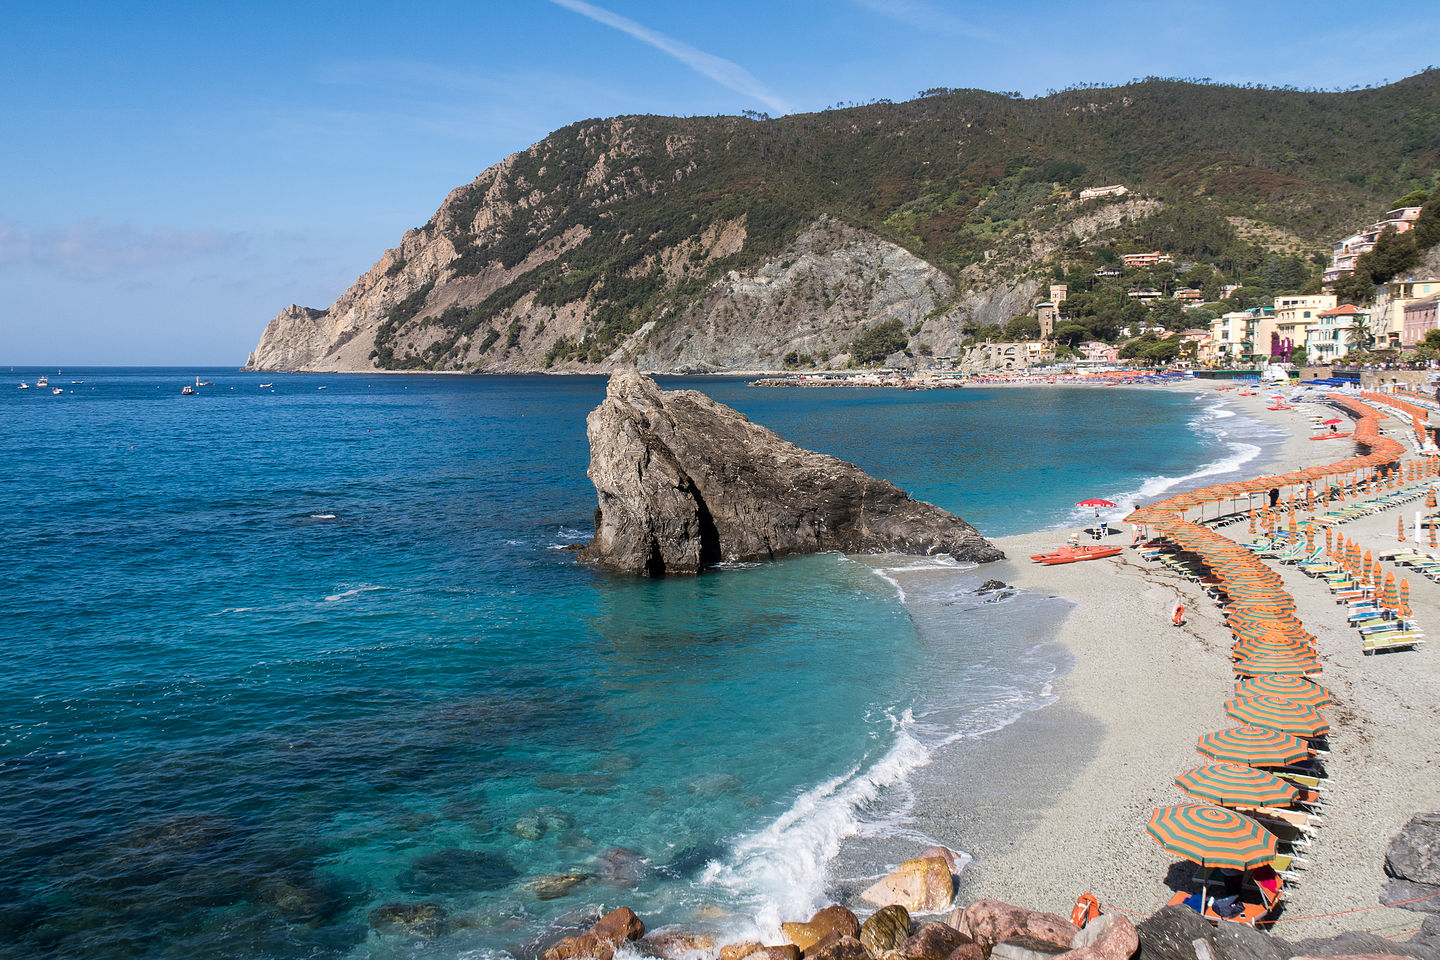 Looking back at Monterosso